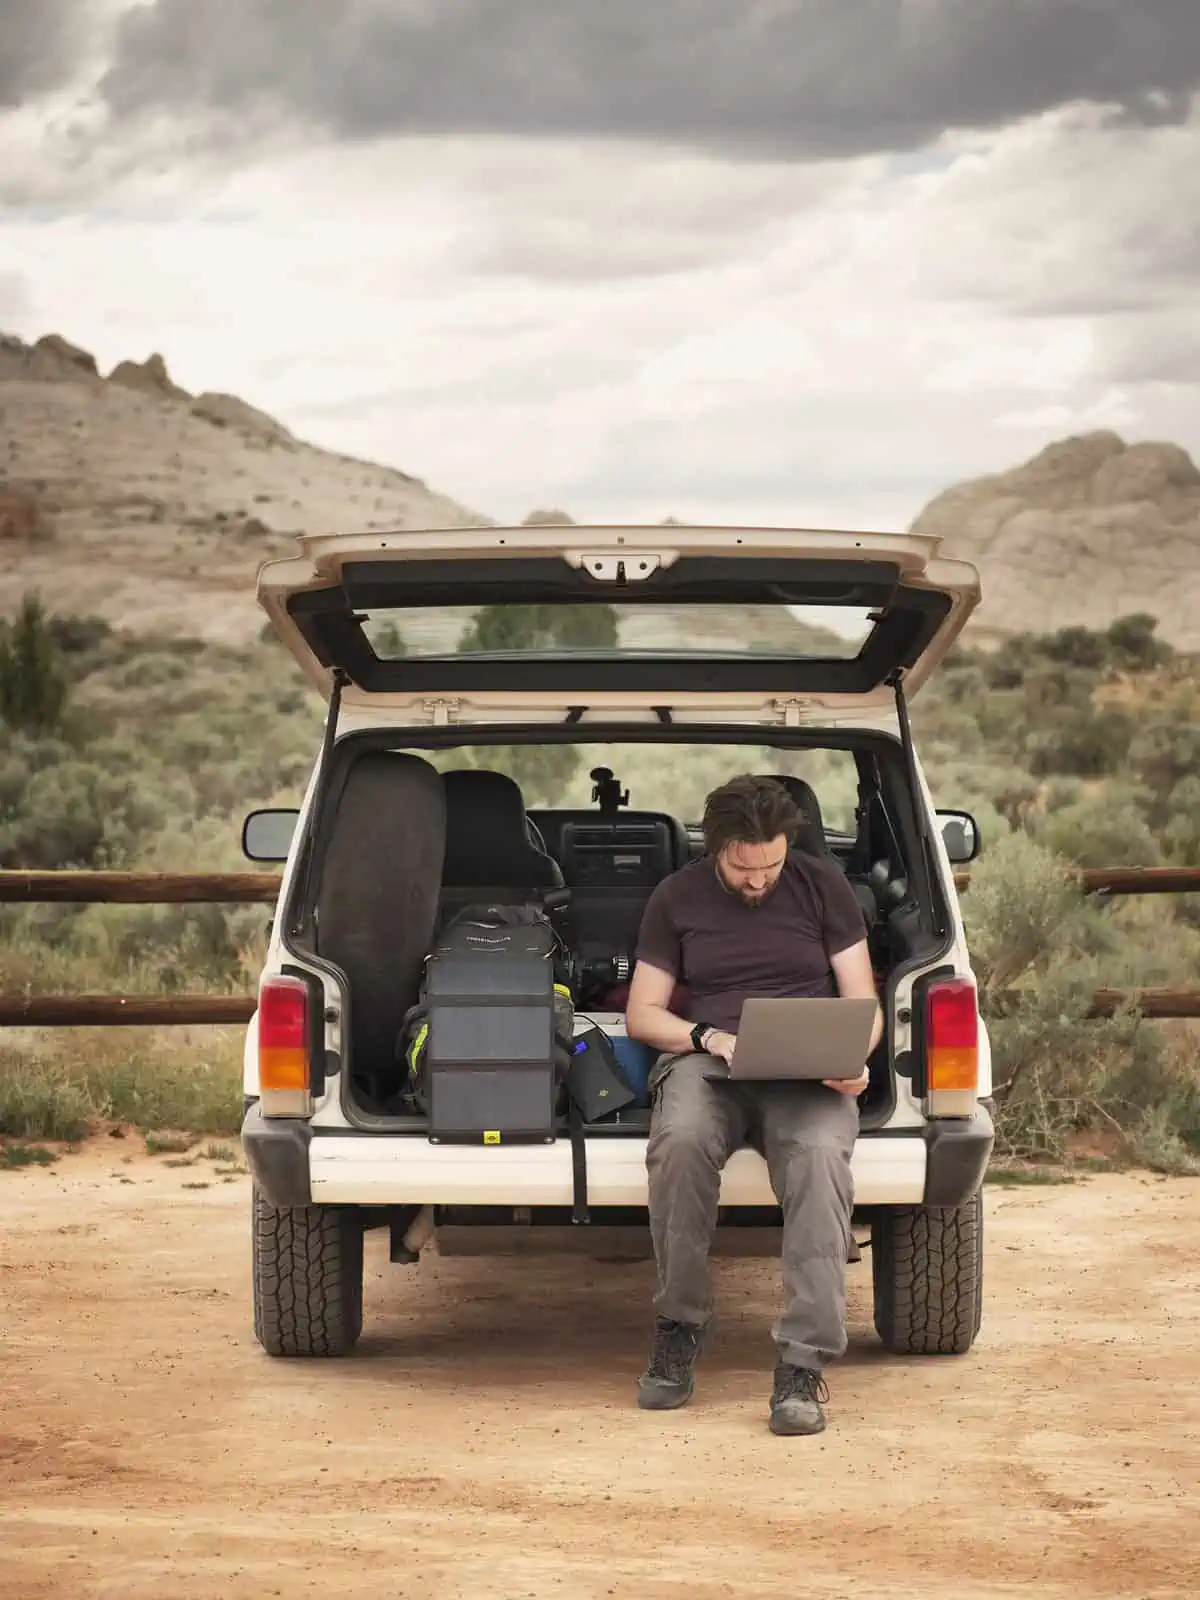 ID: A portrait image. Matt sits on the bumper of the boot of a 4x4 car. He is wearing grey trousers and purple top. He has a laptop on his knee and is working. To the side of him is a solar panel which is charging, and there are other photography kit items in the boot. The car is white and it is parked in a sandy spot. There is a fence behind the car, in the background are mountains.